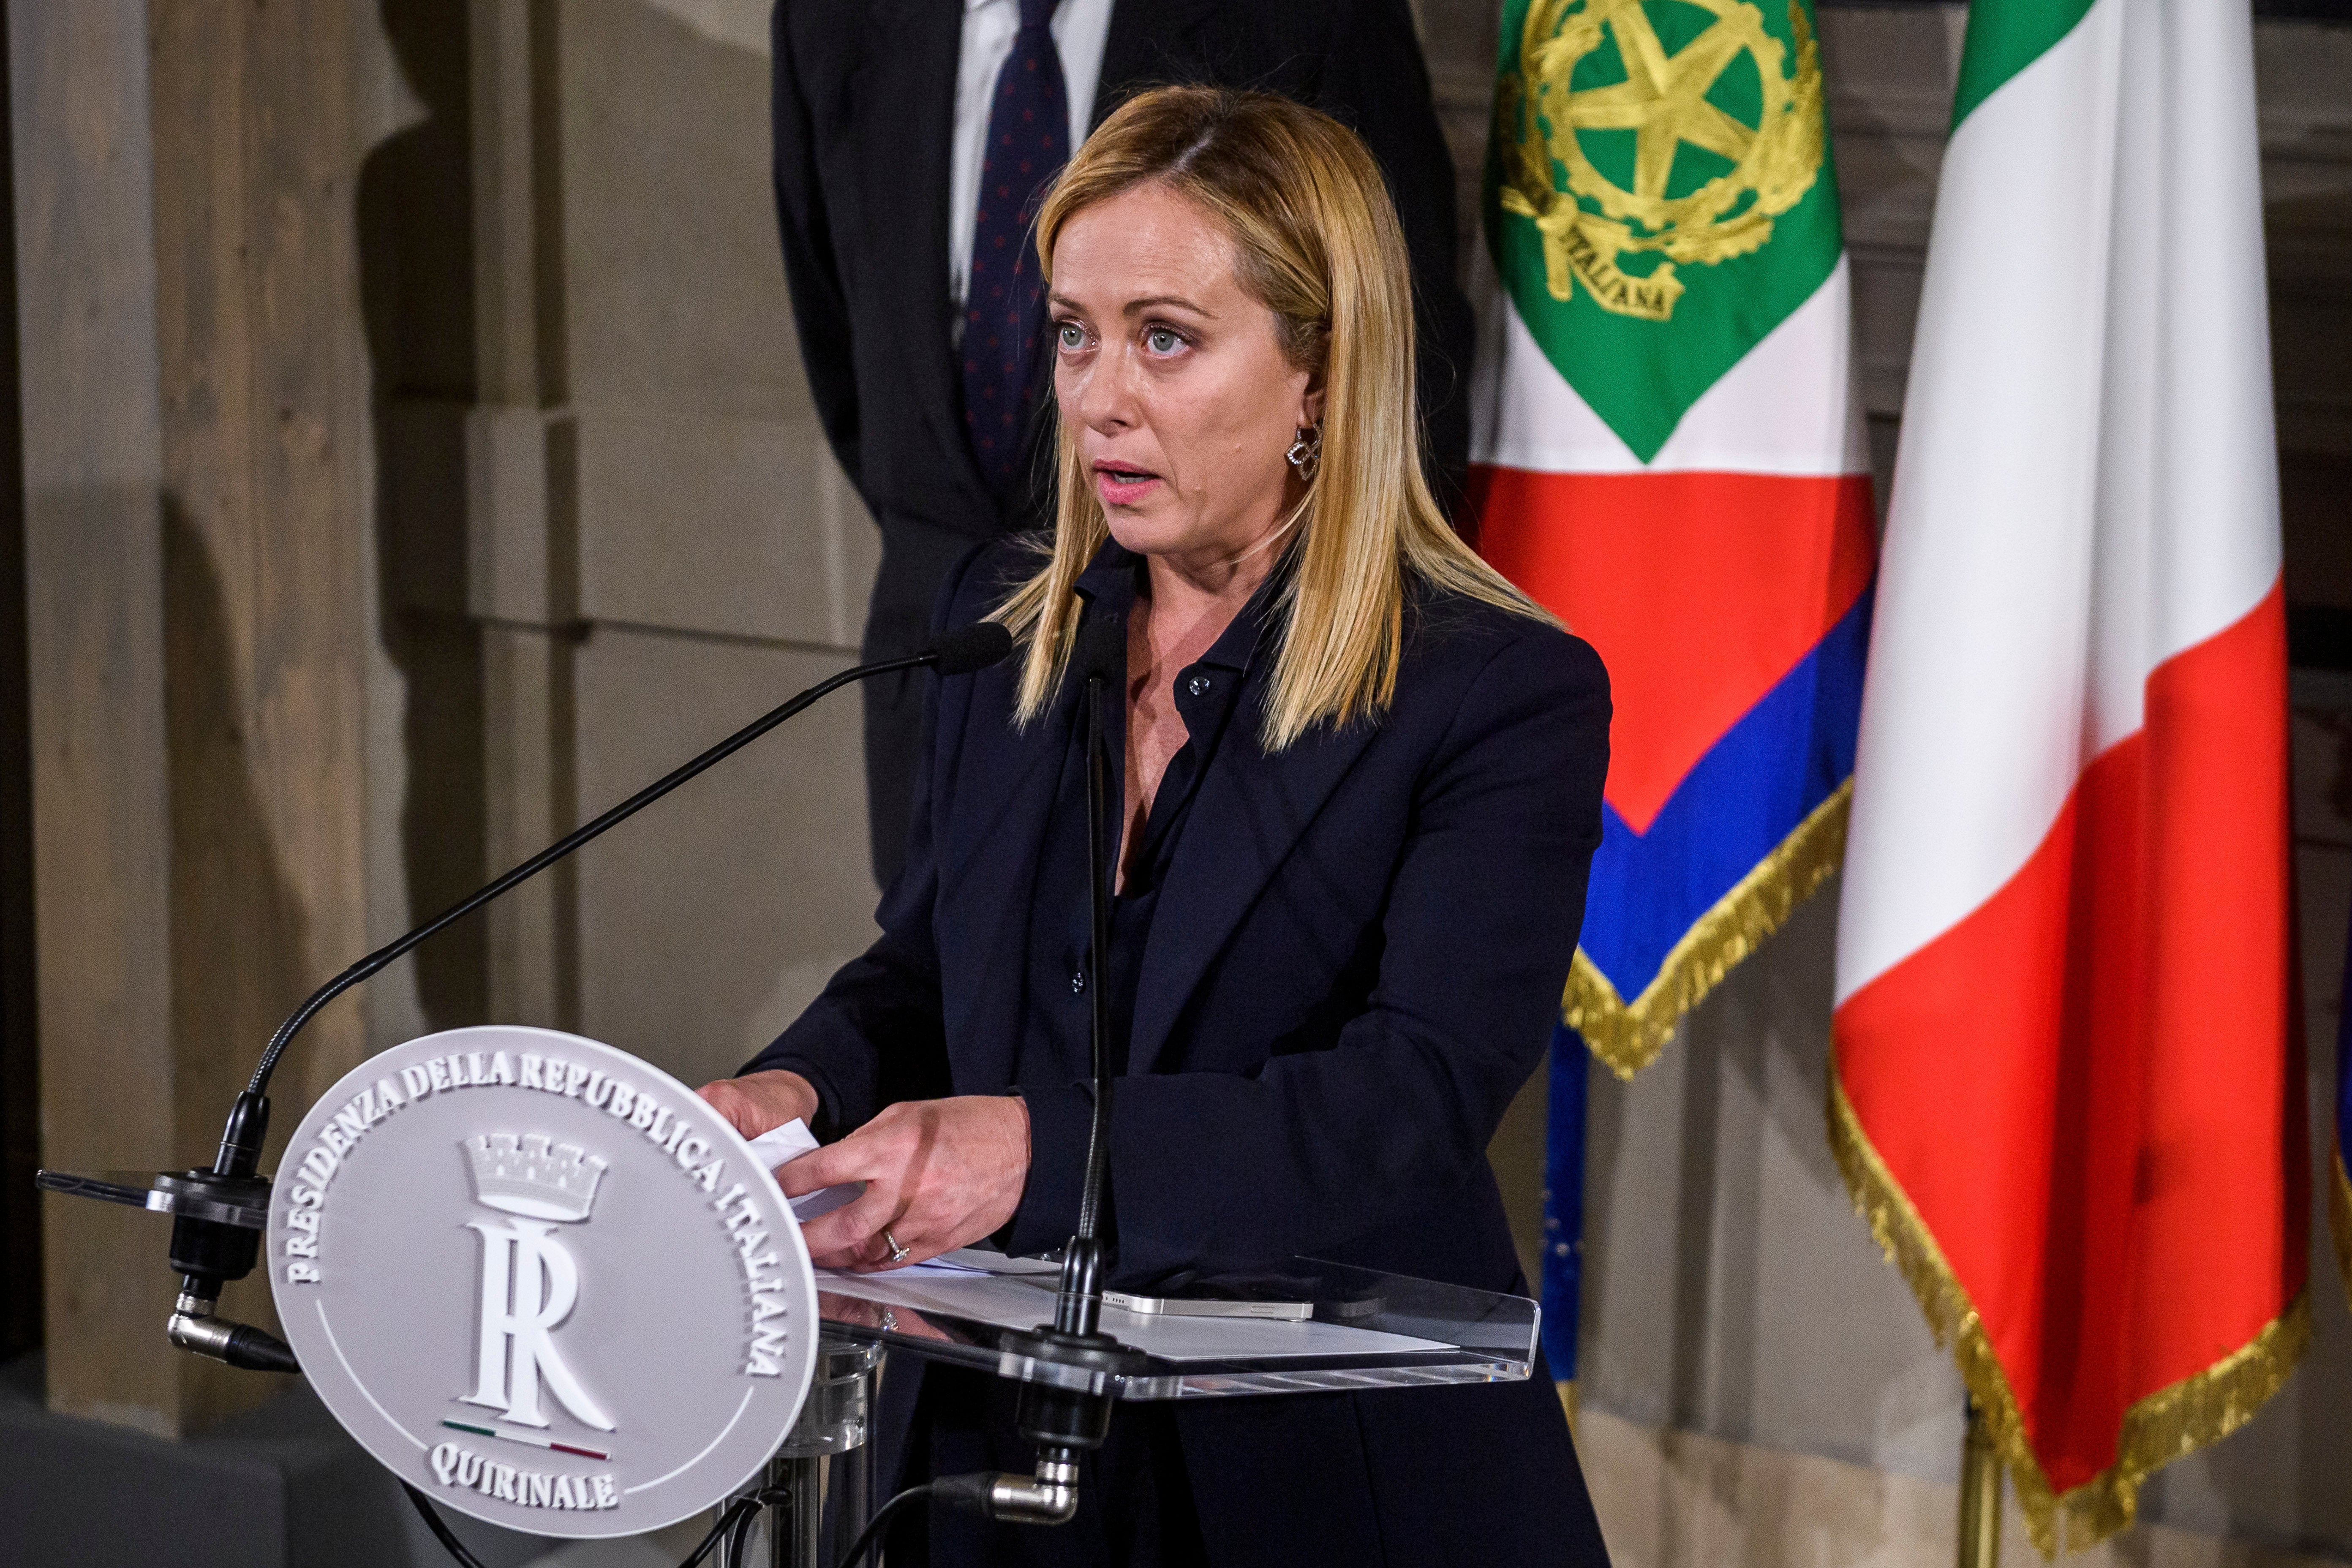 Giorgia Meloni speaks to the media after being appointed prime minister by Italian president Sergio Mattarella